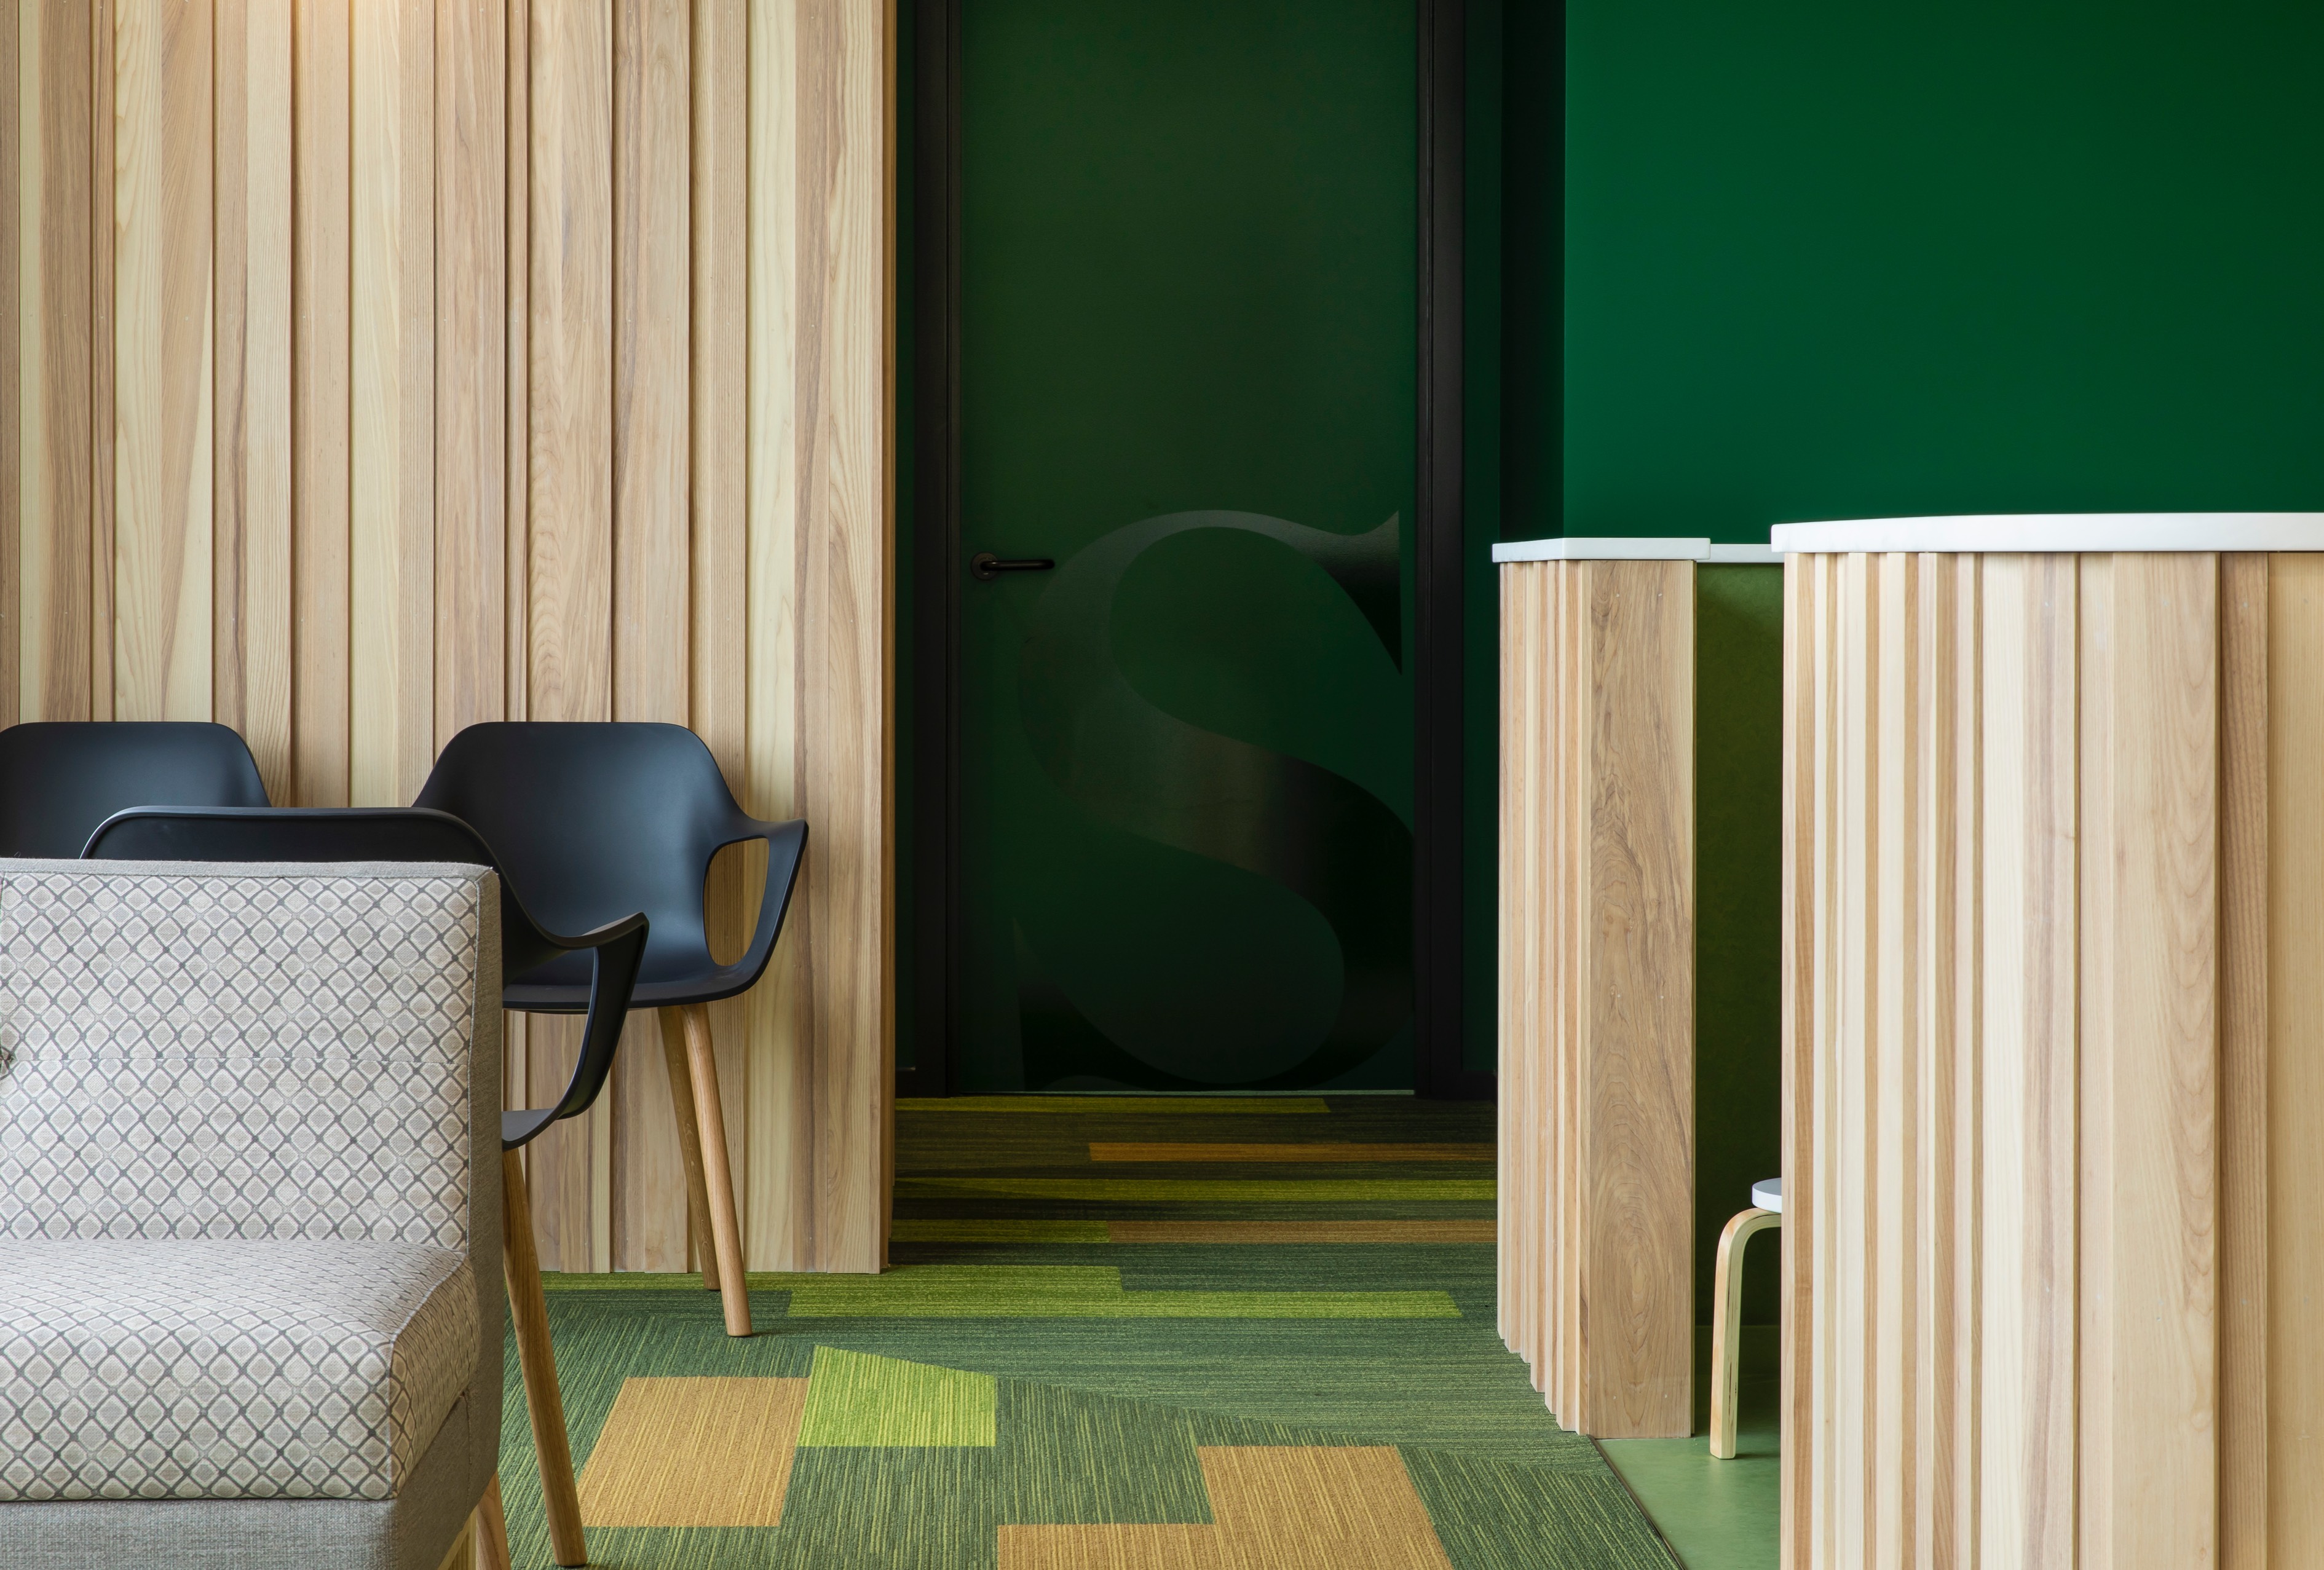 Waiting area with green palatte and wood finishes